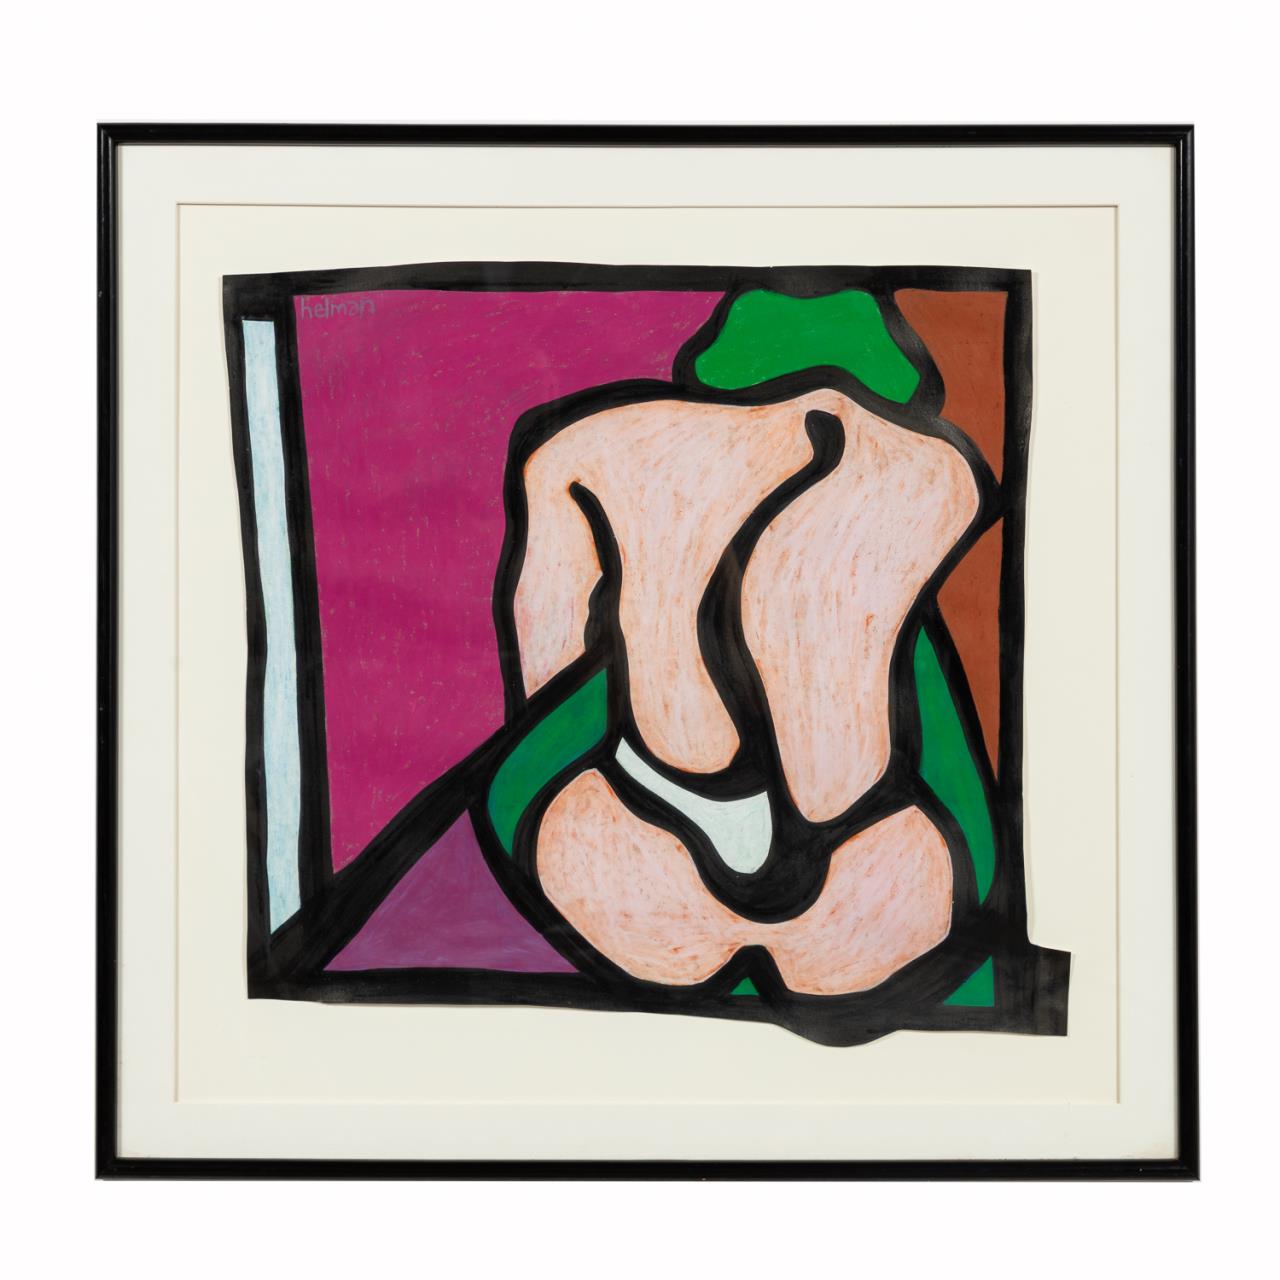 MARC HELMAN, SEATED NUDE, MIXED